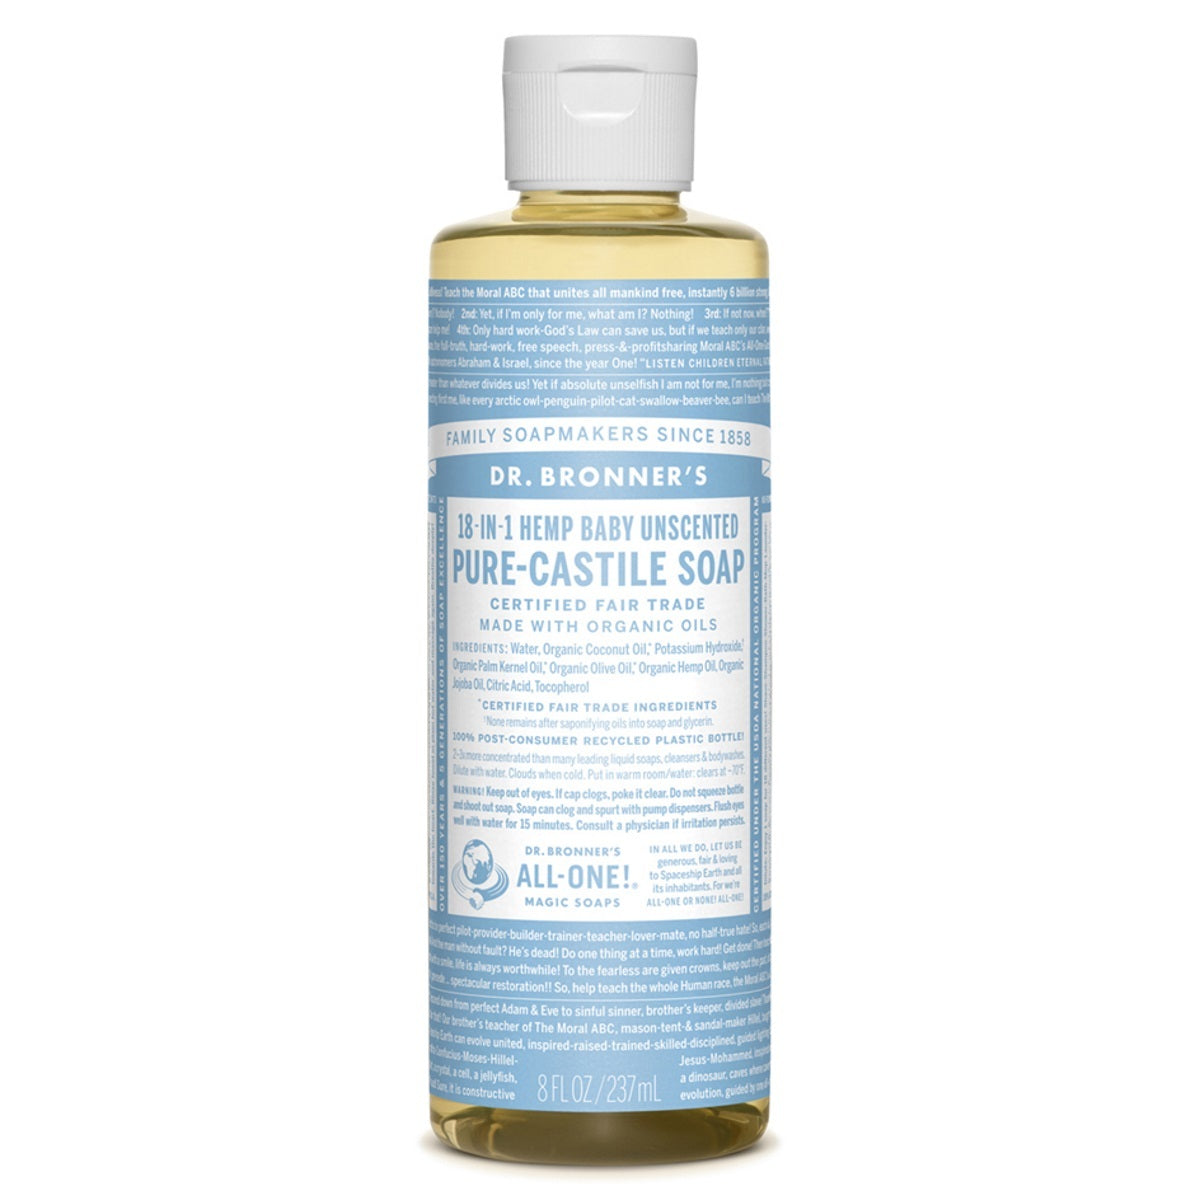 Primary image of Baby Unscented Castile Liquid Soap